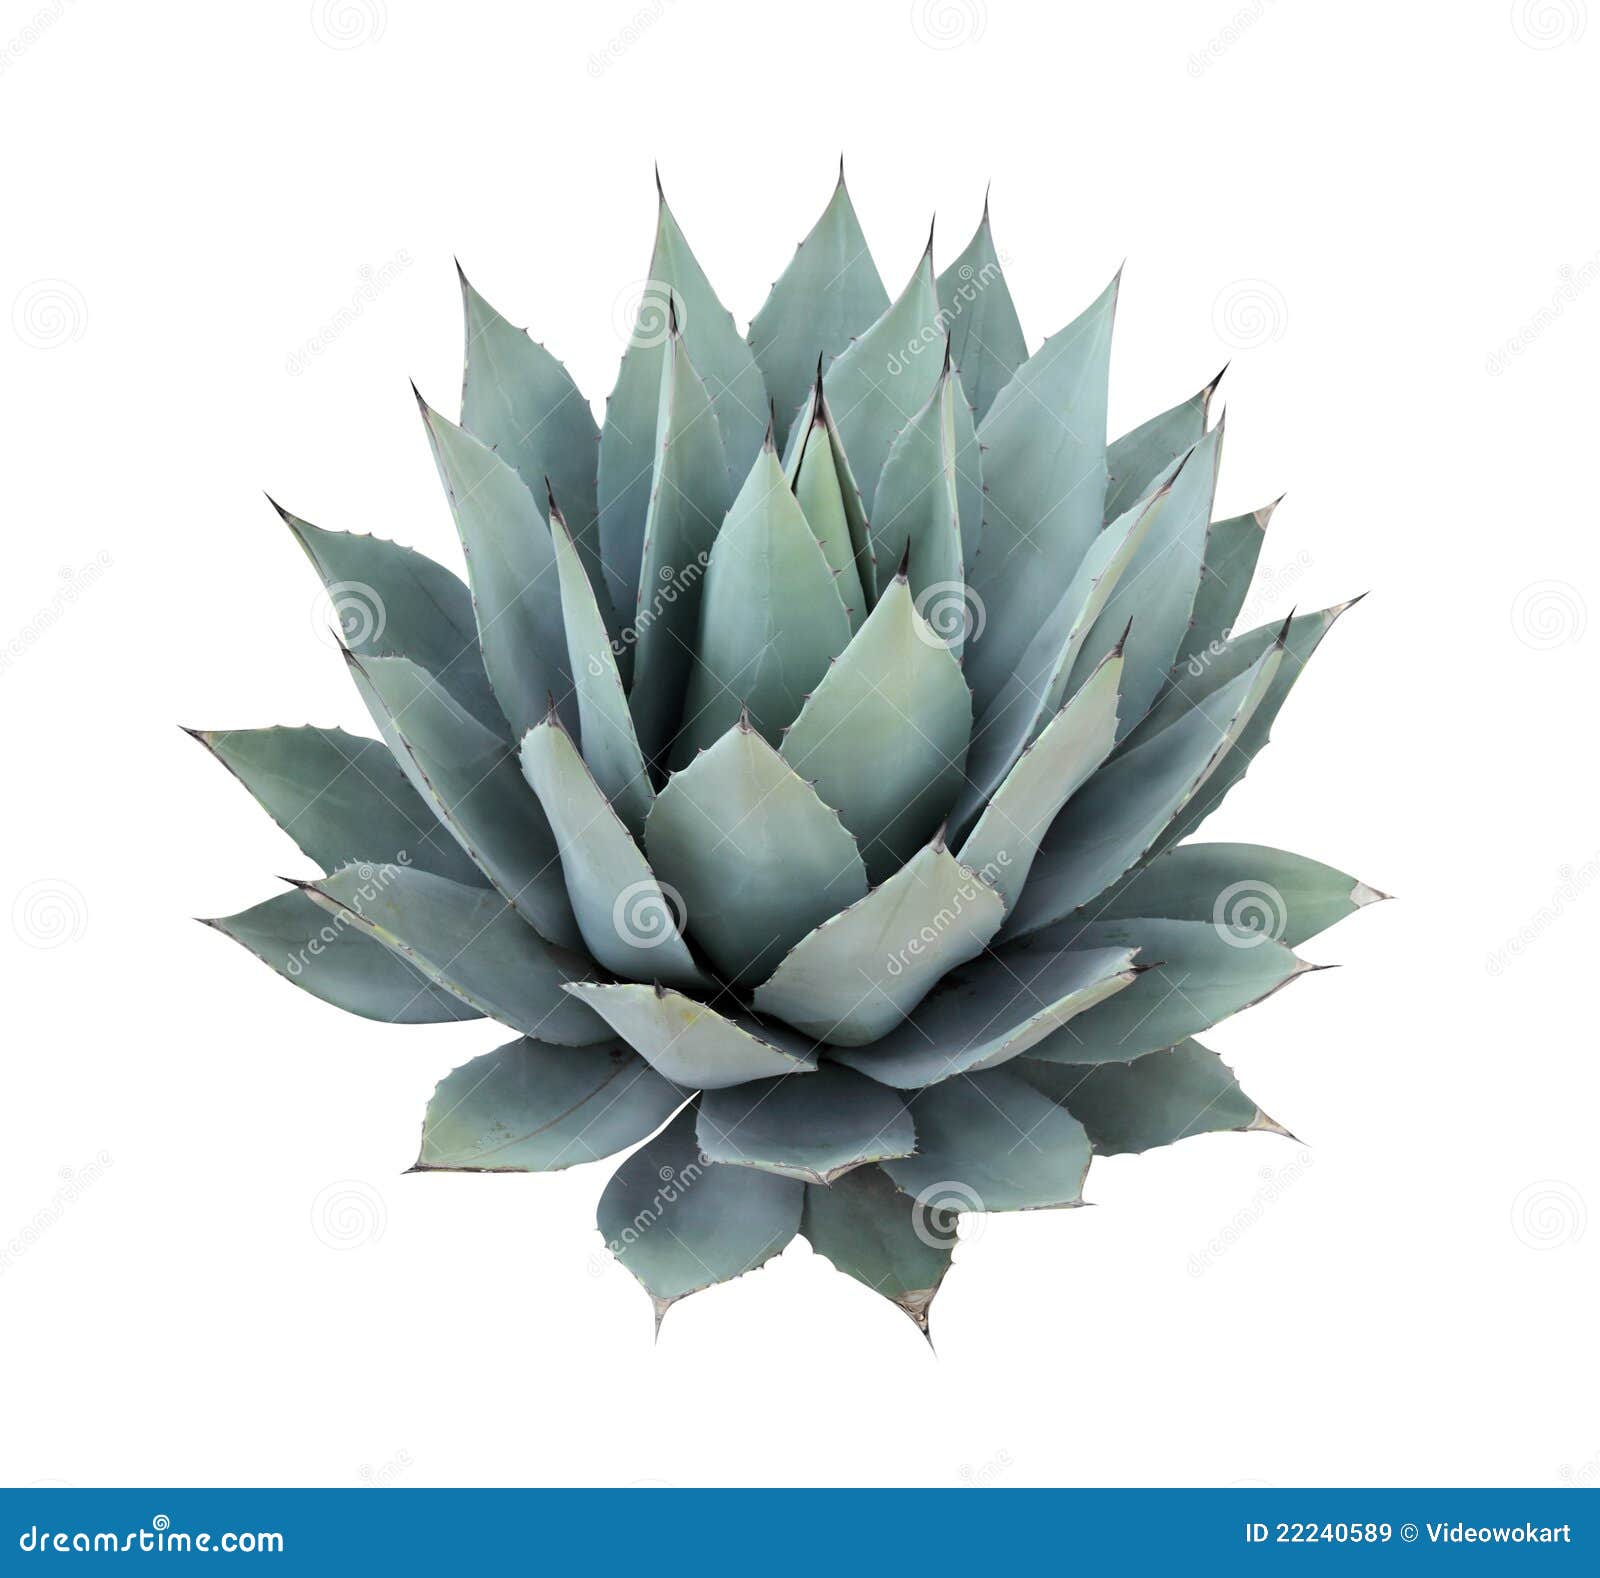 agave plant  on white background